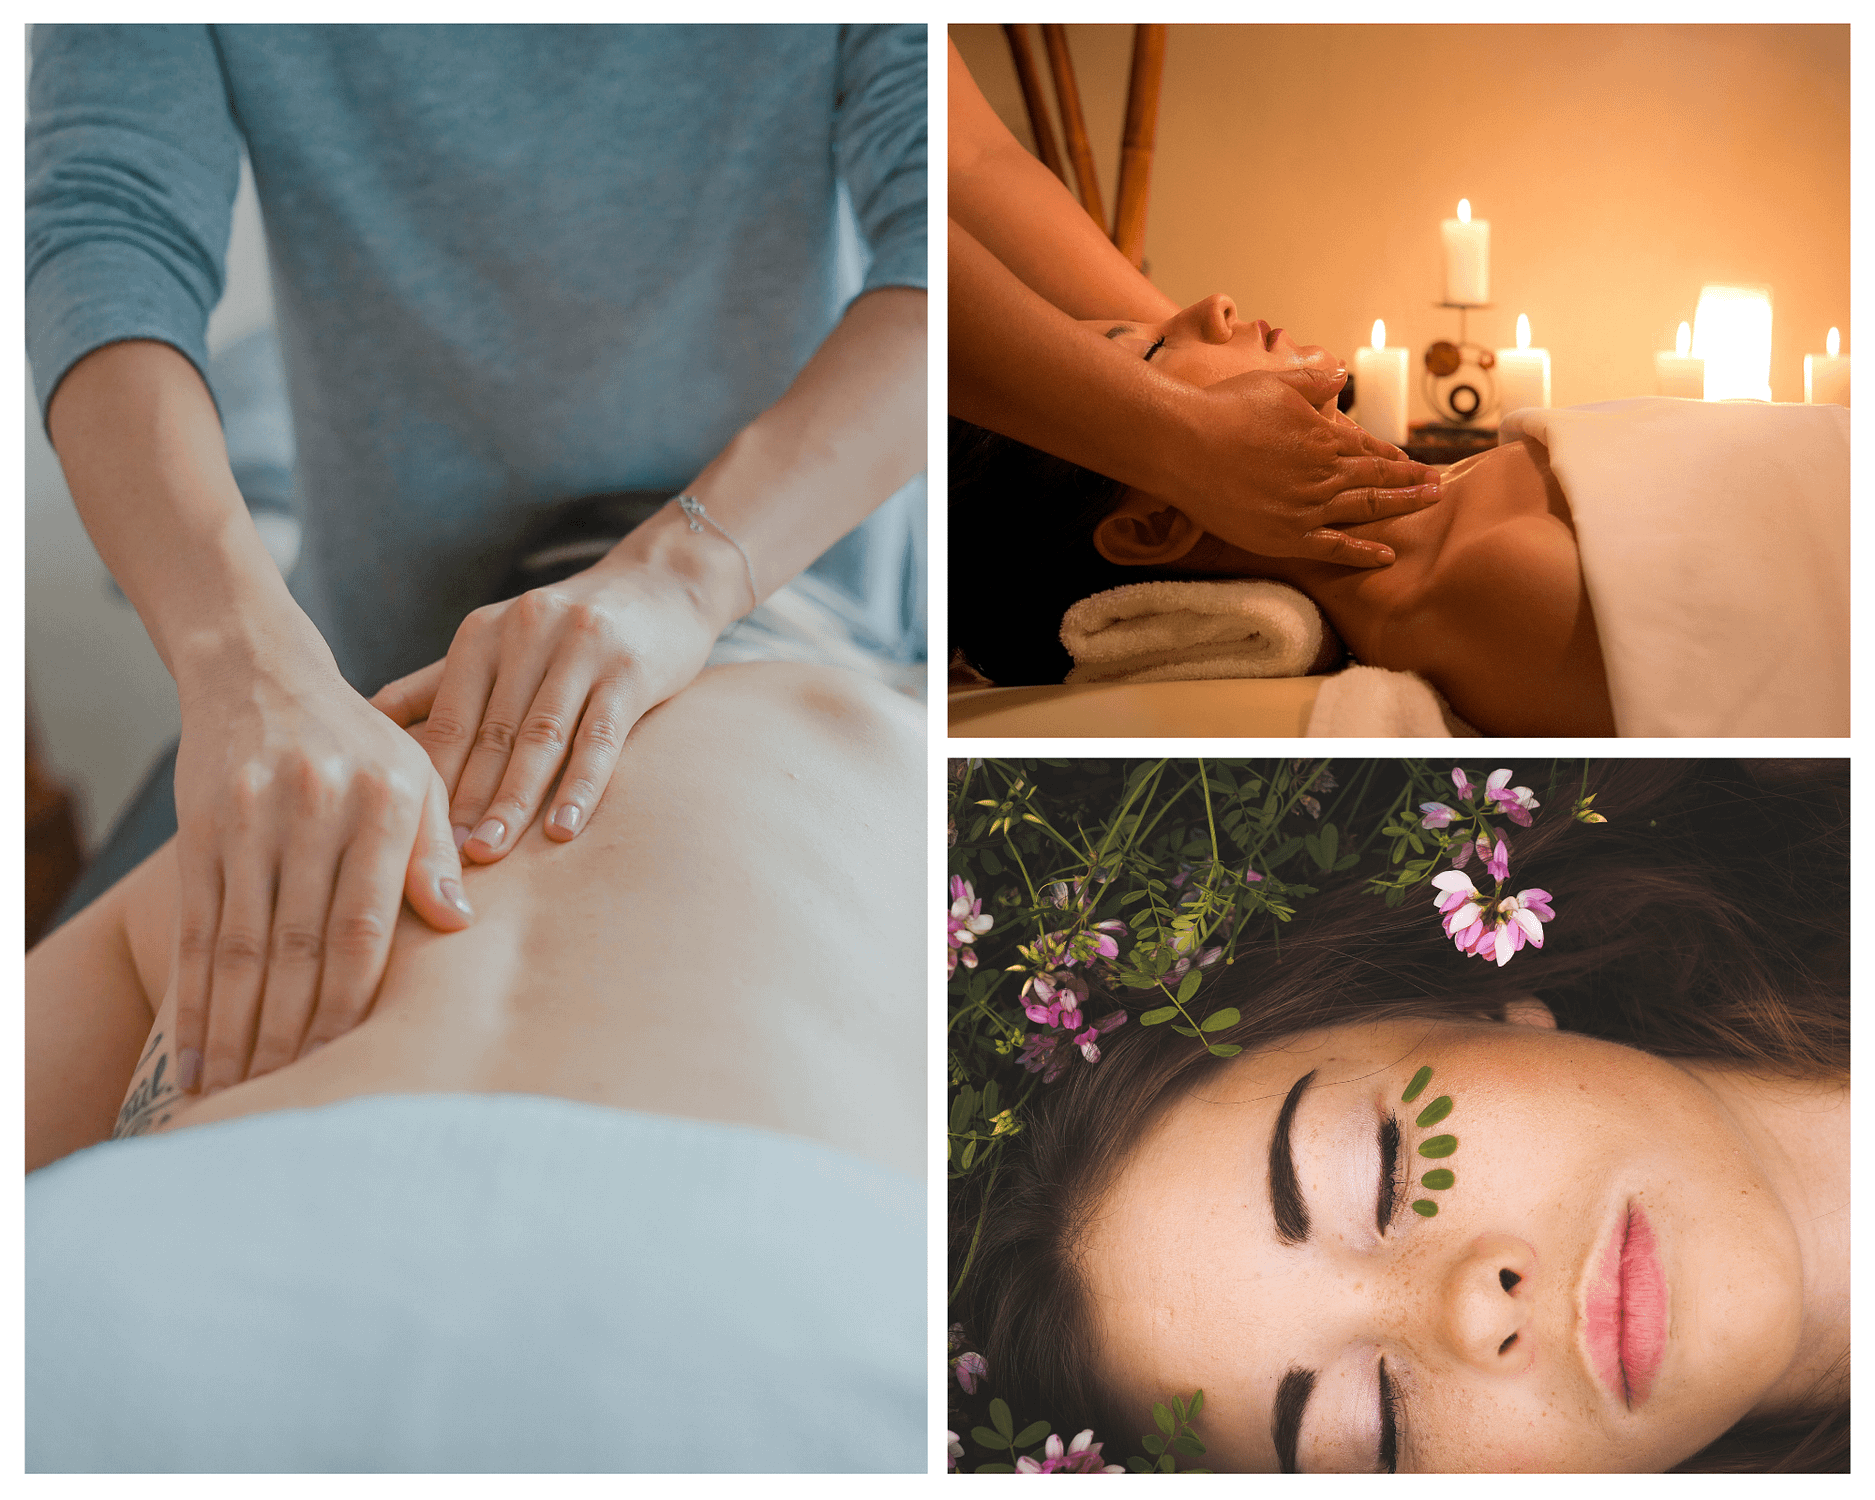 Most Popular Types of Massages